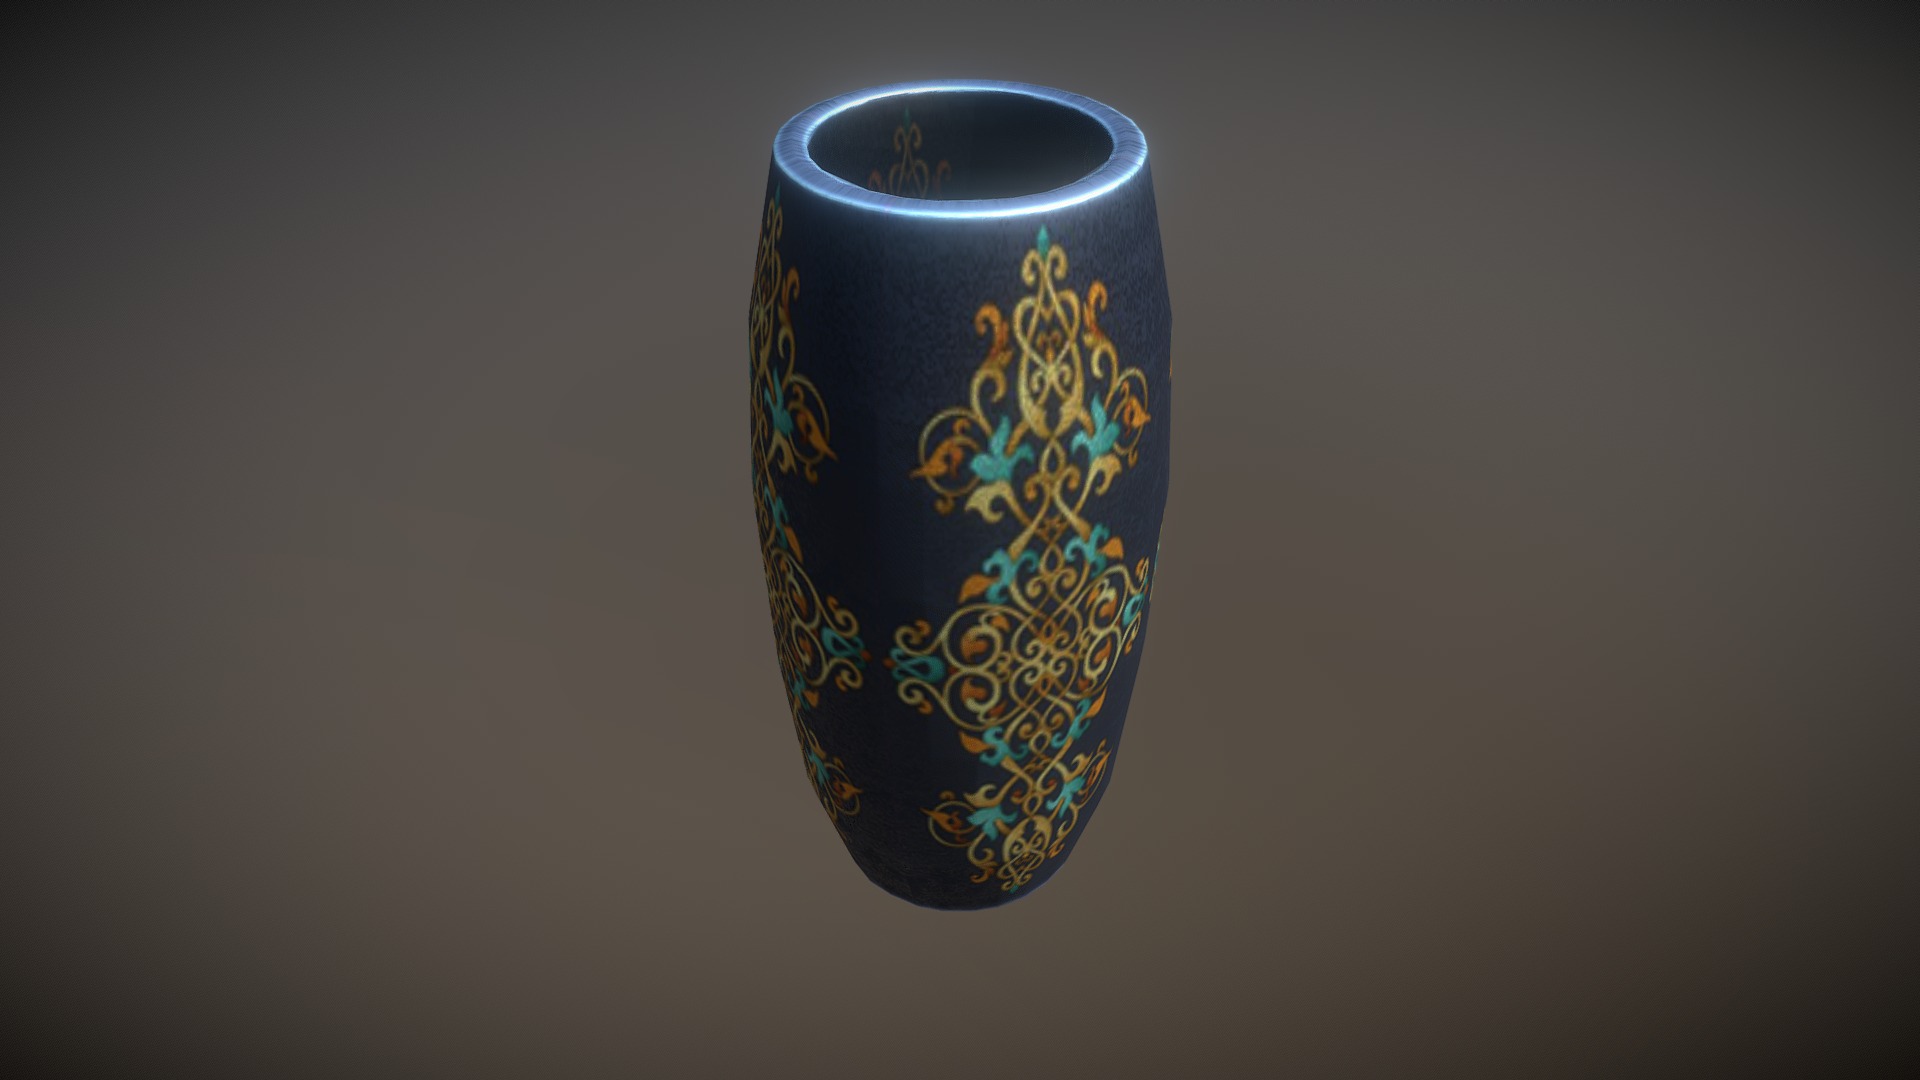 3D model Crock - This is a 3D model of the Crock. The 3D model is about a blue vase with a gold design.